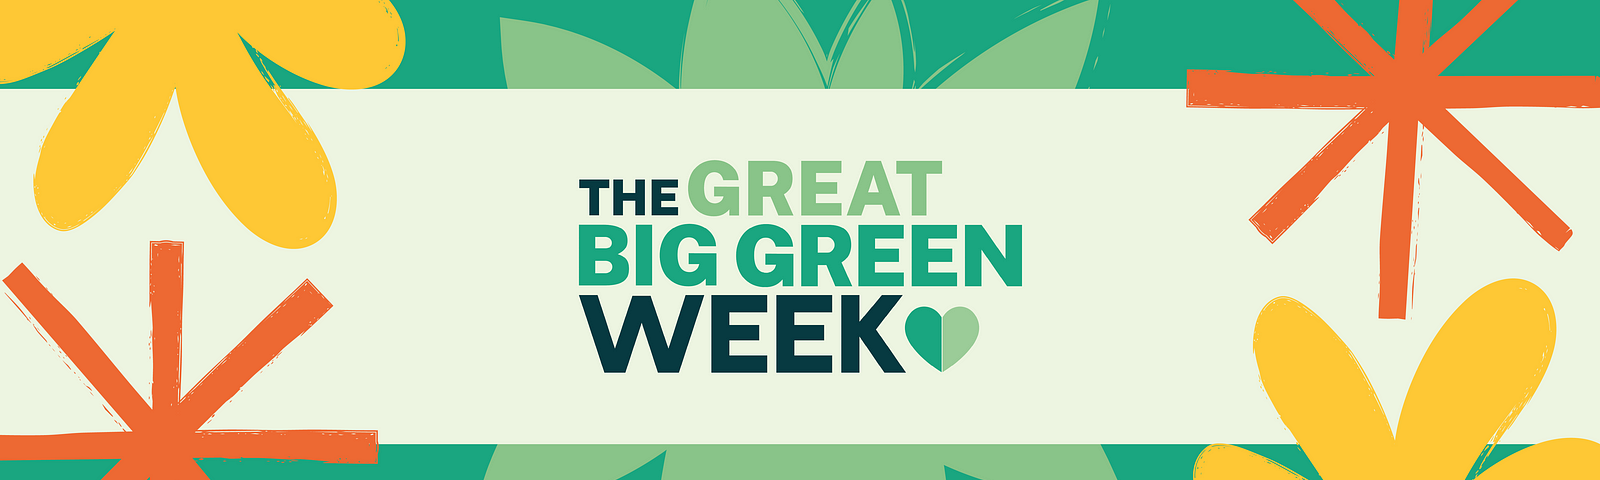 ‘The Great Big Green Week’ written next to the logo of a green heart. One half of the heart is dark green and the other is light green. The writing is surrounded by a green boarder with graphics of orange and yellow flowers.